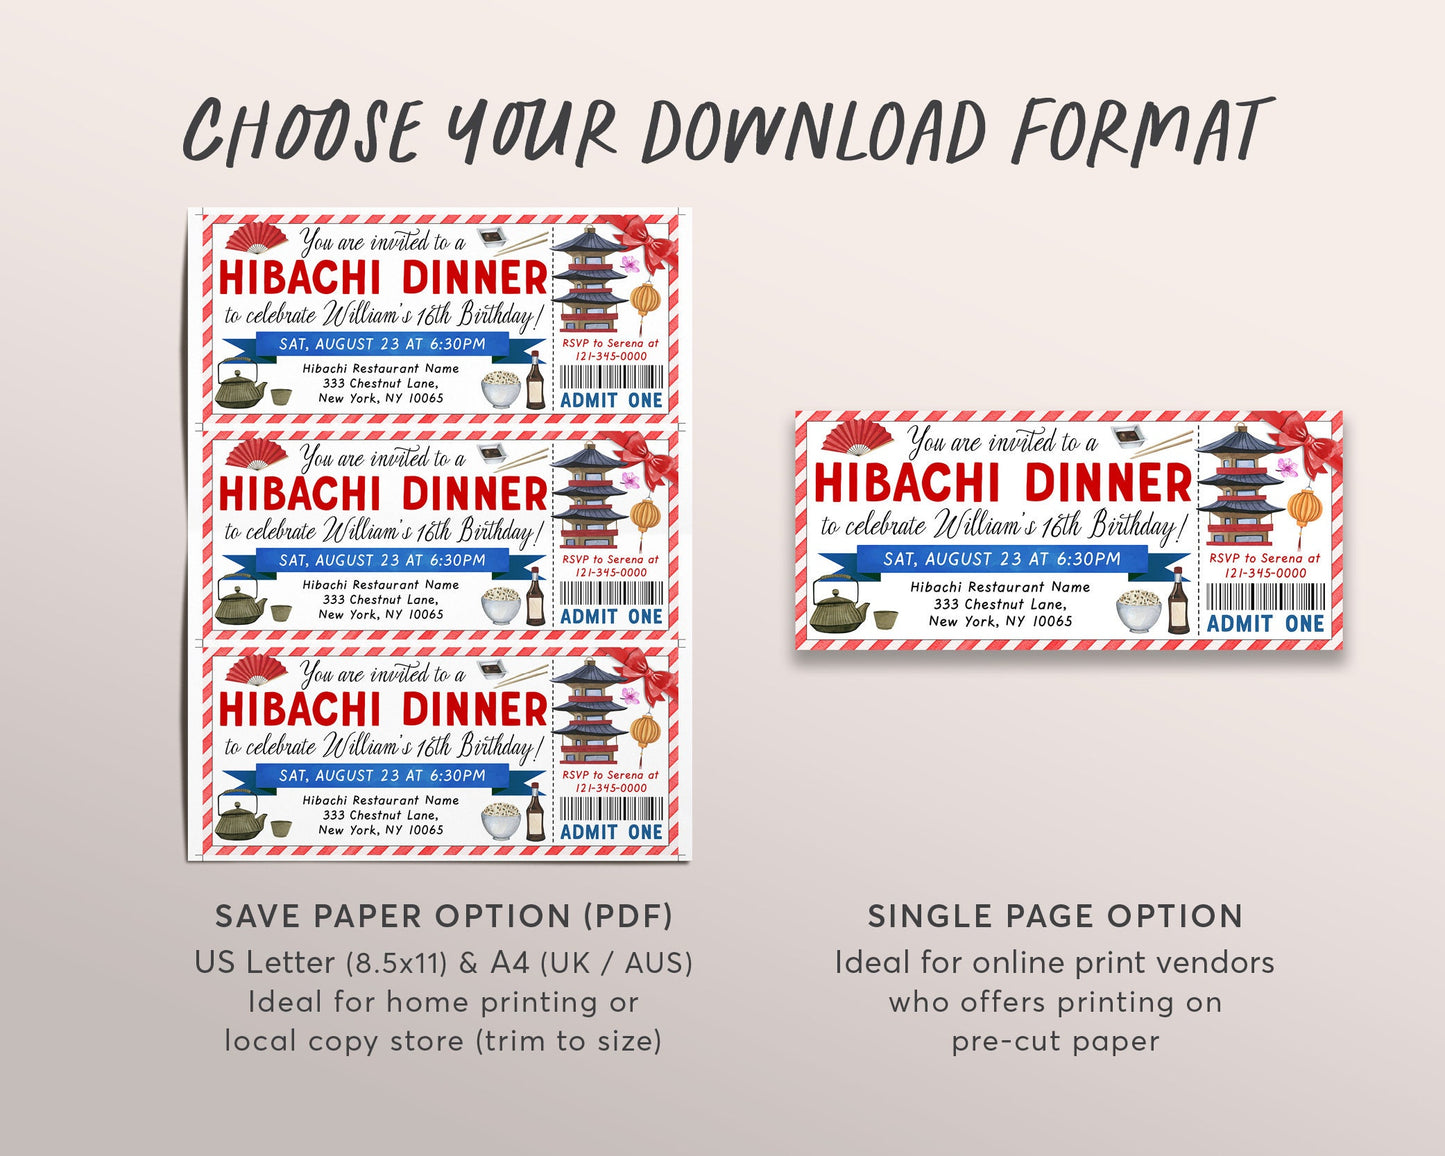 Hibachi Dinner Party Invitation Ticket Editable Template, Birthday Japanese BBQ Restaurant Dinner Invite For Kids And Adults Voucher DIY